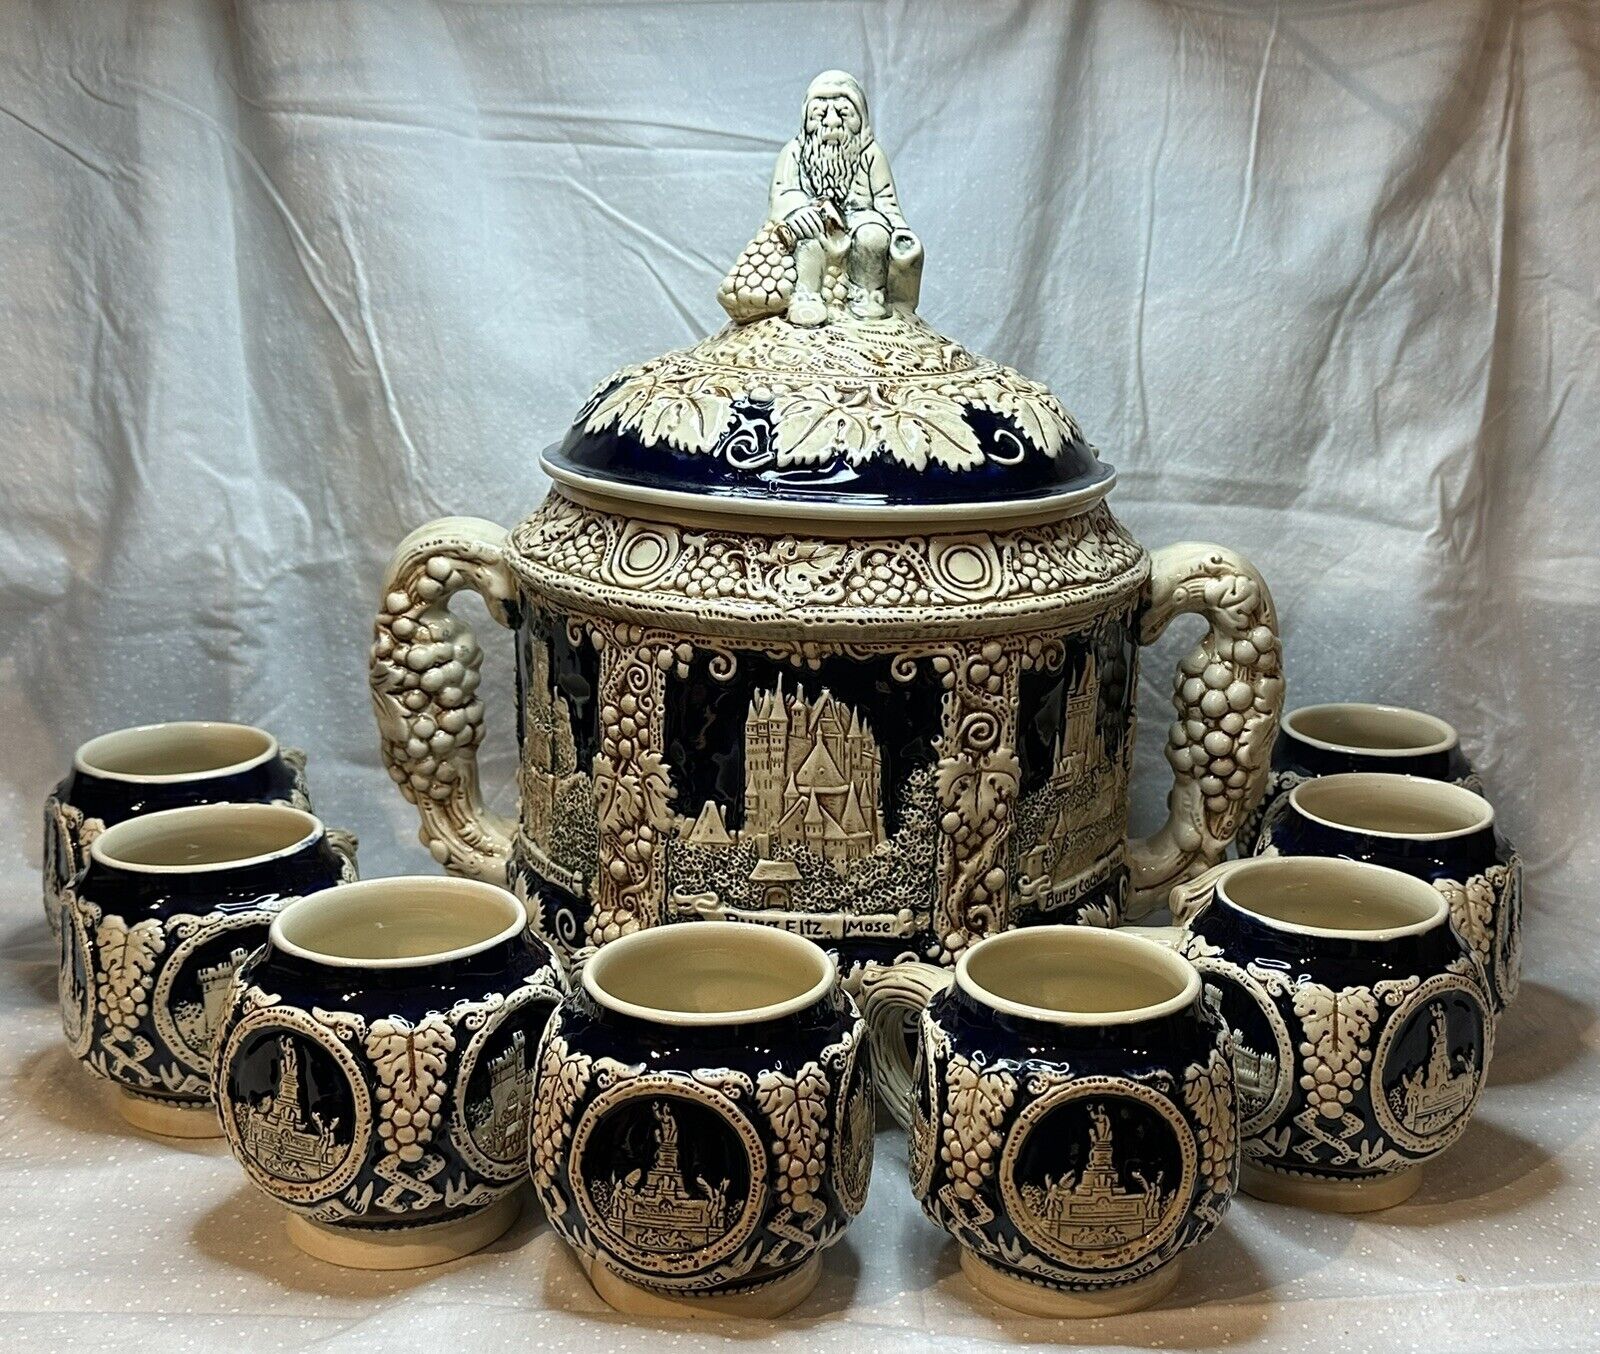 Vintage Marzi & Remy German Castles Punch Bowl / Tureen #2940 With 8 Cups #2935